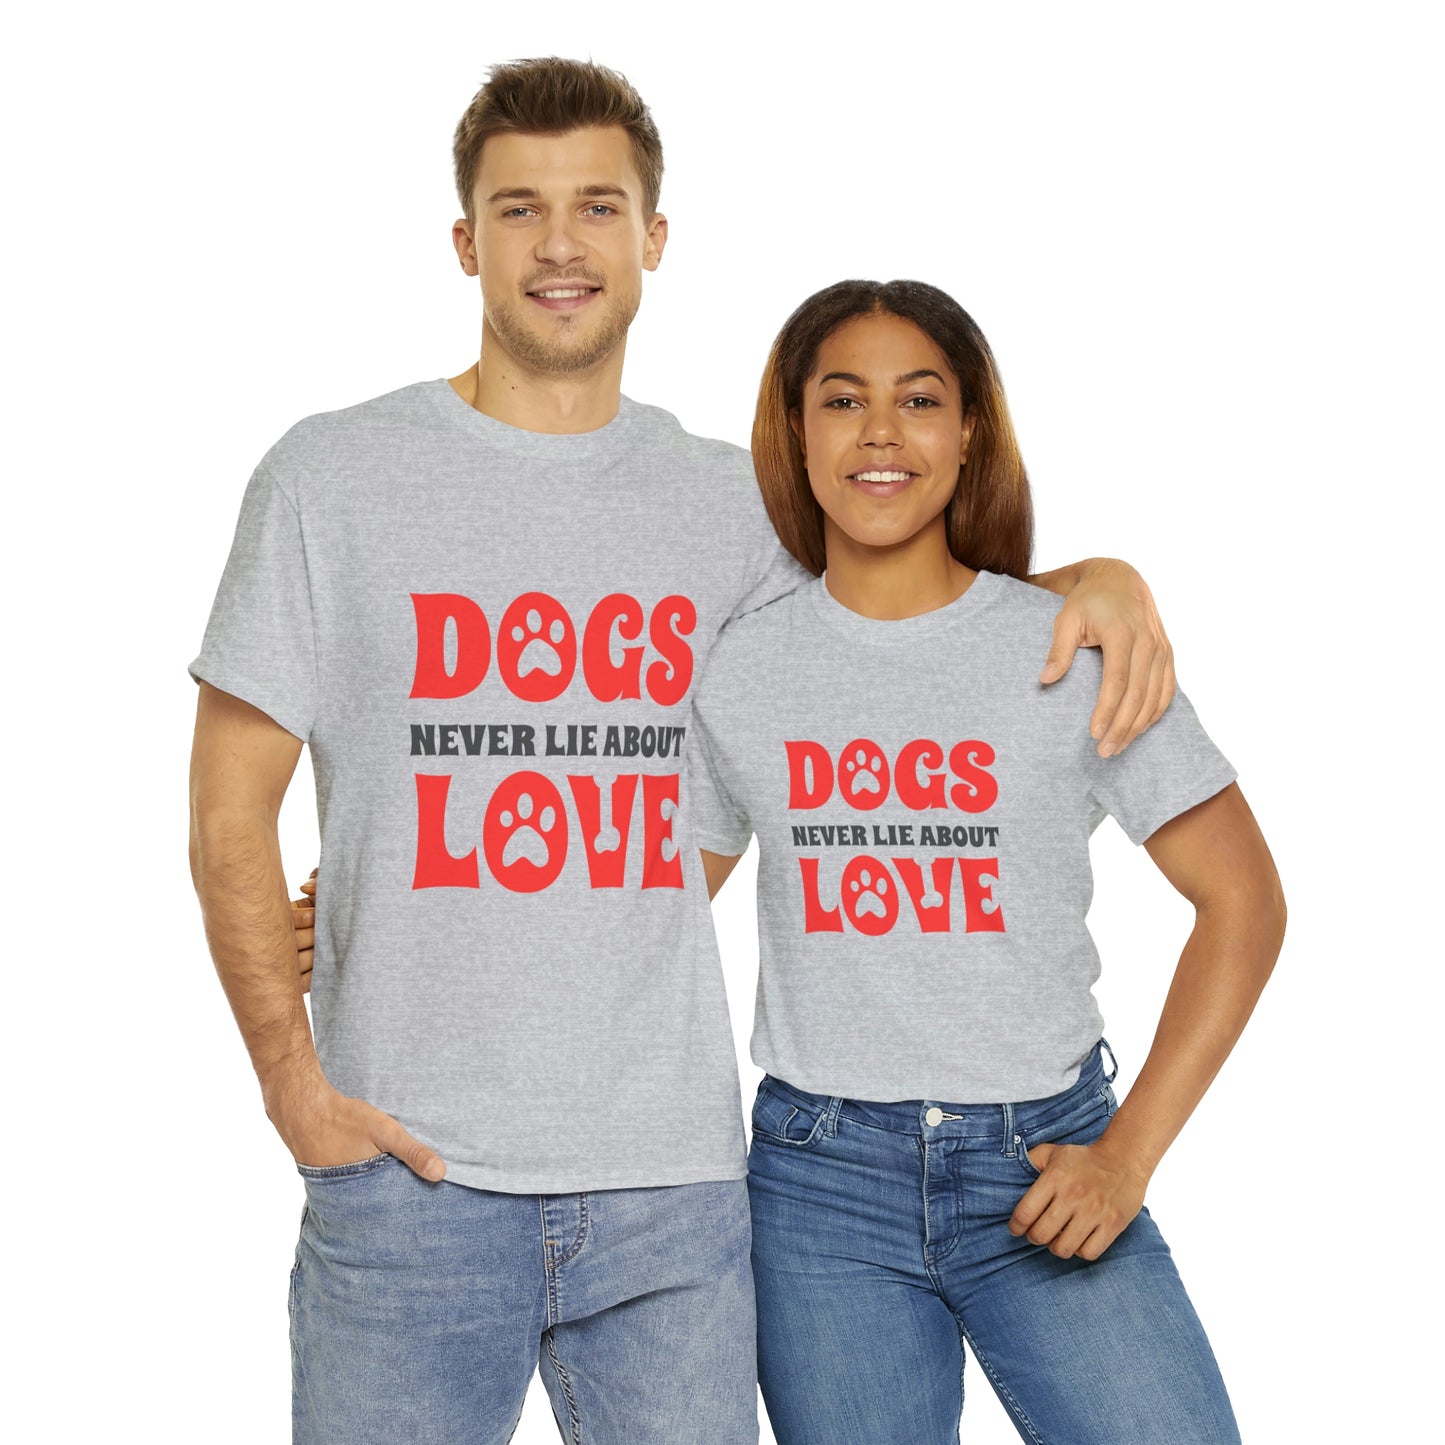 Dogs Never Lie About Love Tee